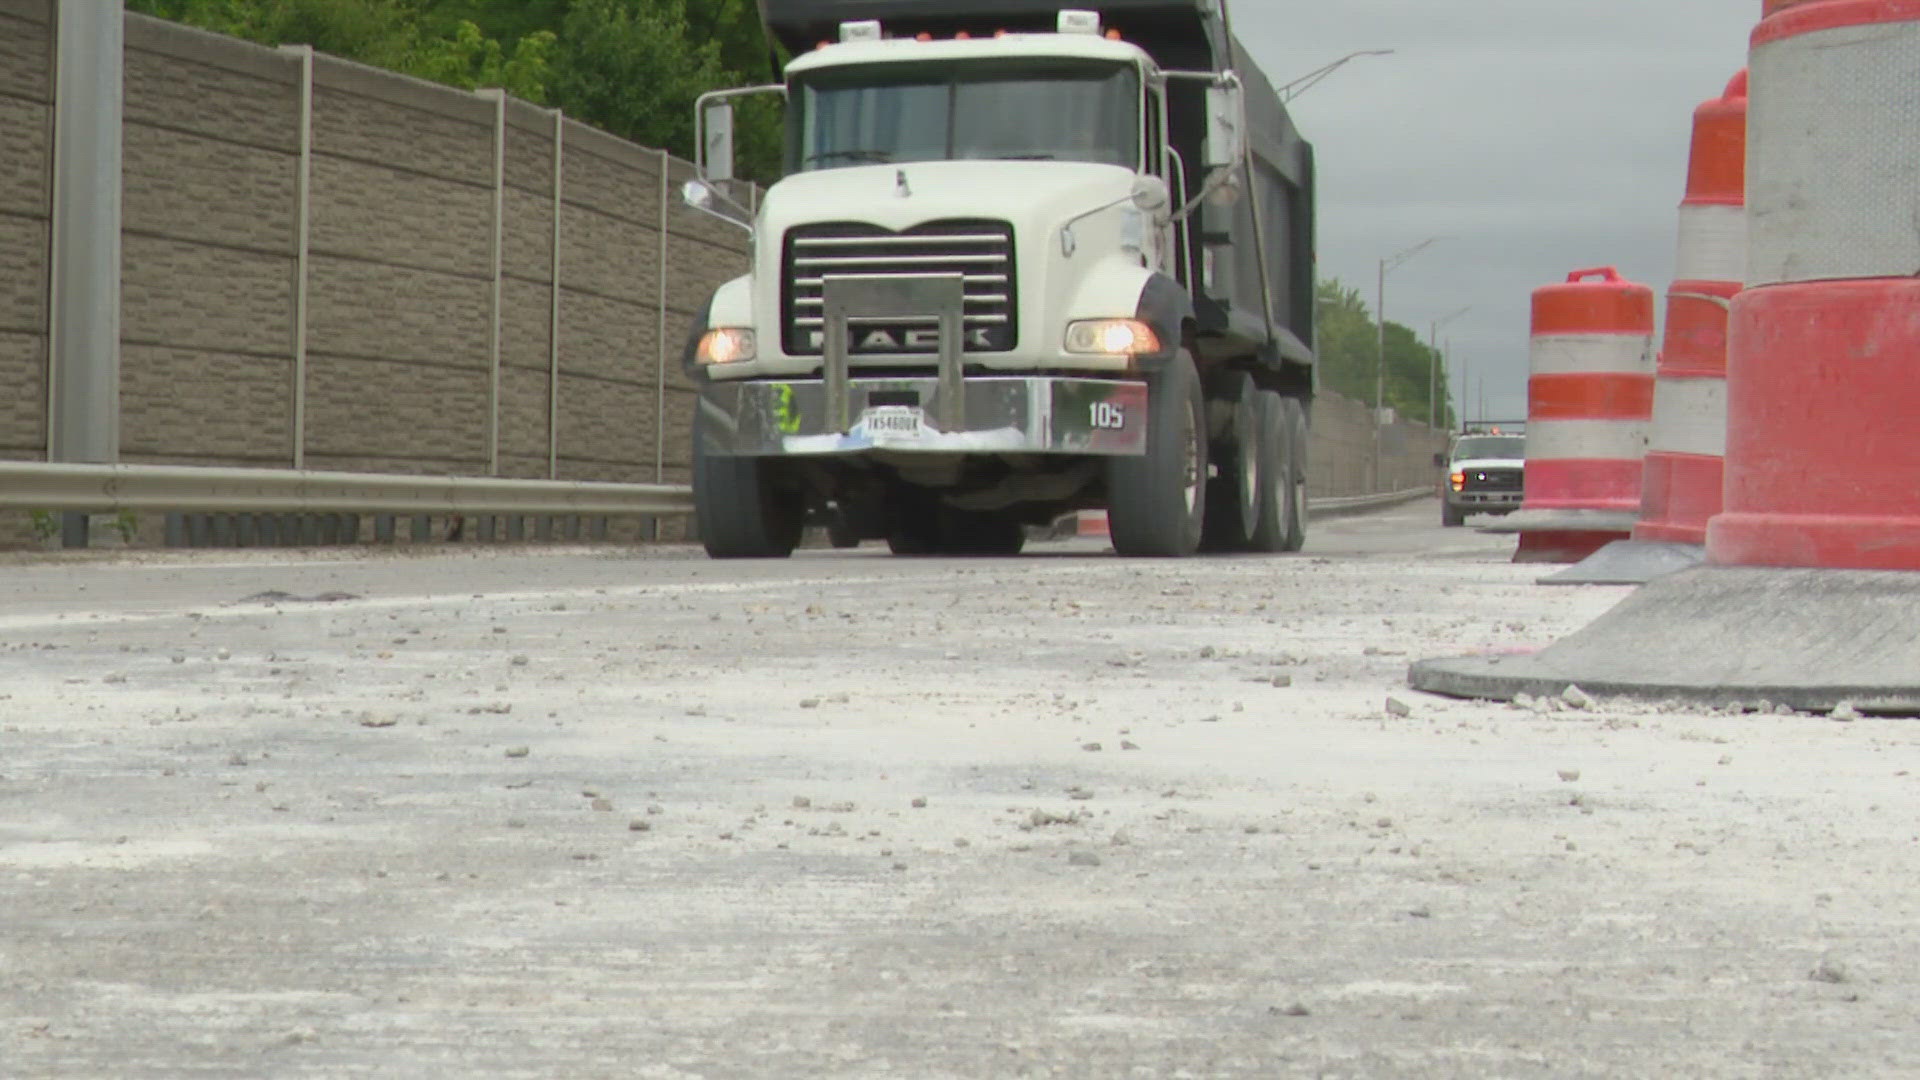 13News reporter Karen Campbell talked with INDOT and learned crews are planning to re-open a portion of the interstate this weekend.